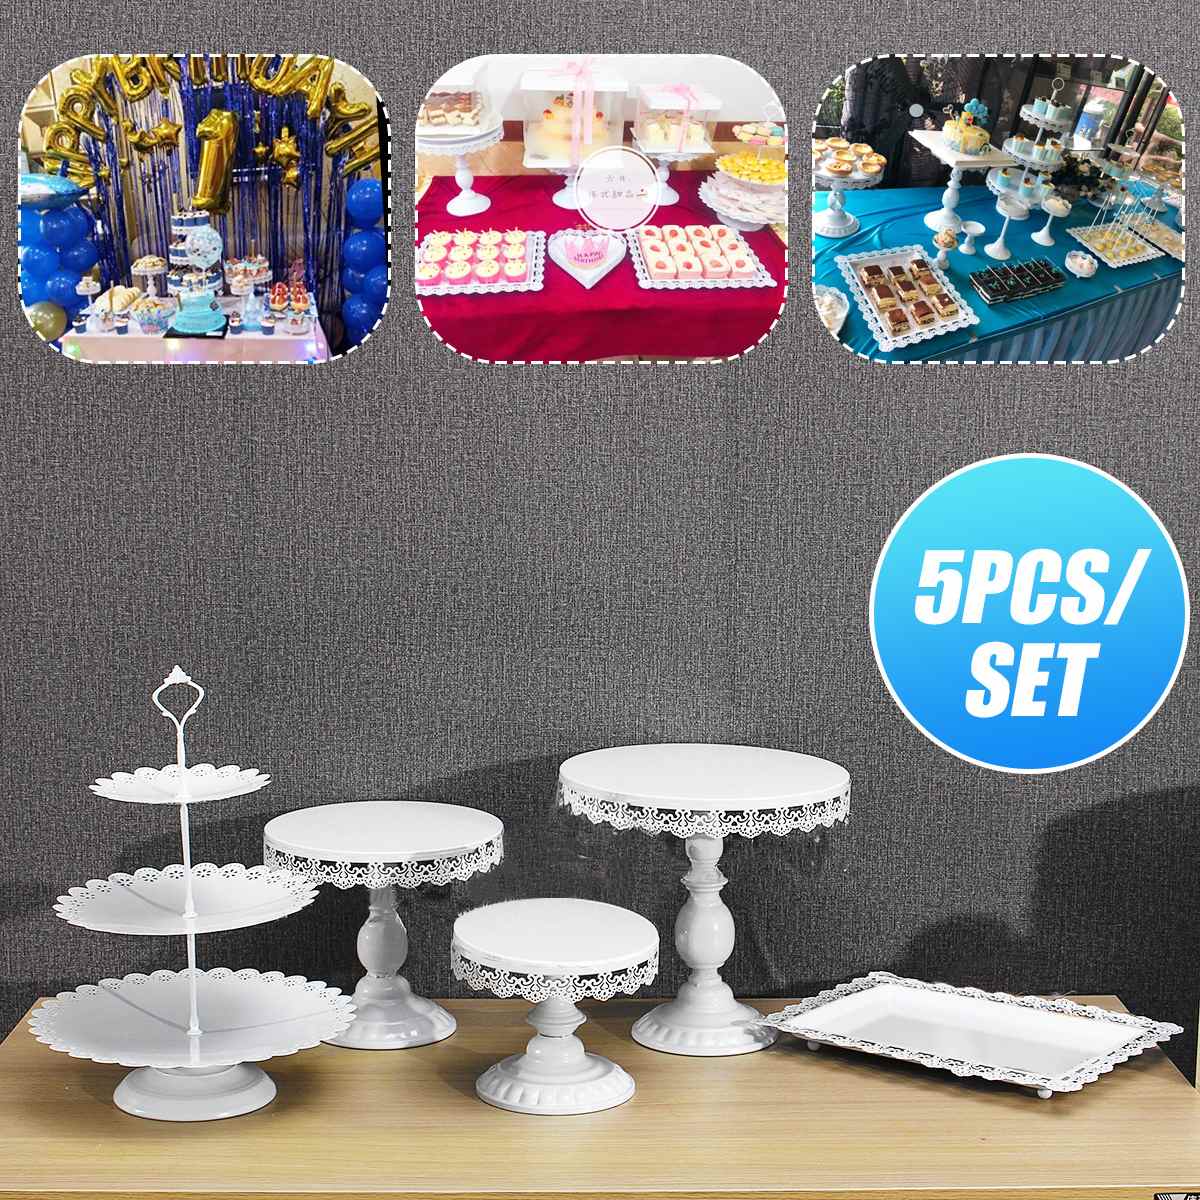 4 Tiers Party Wedding Cake Stand, Cupcake Stand Holder, Tiered Dessert Stand, Food Display Stand For Birthday Parties- White: Cupcake Stands - B074CCTQYR